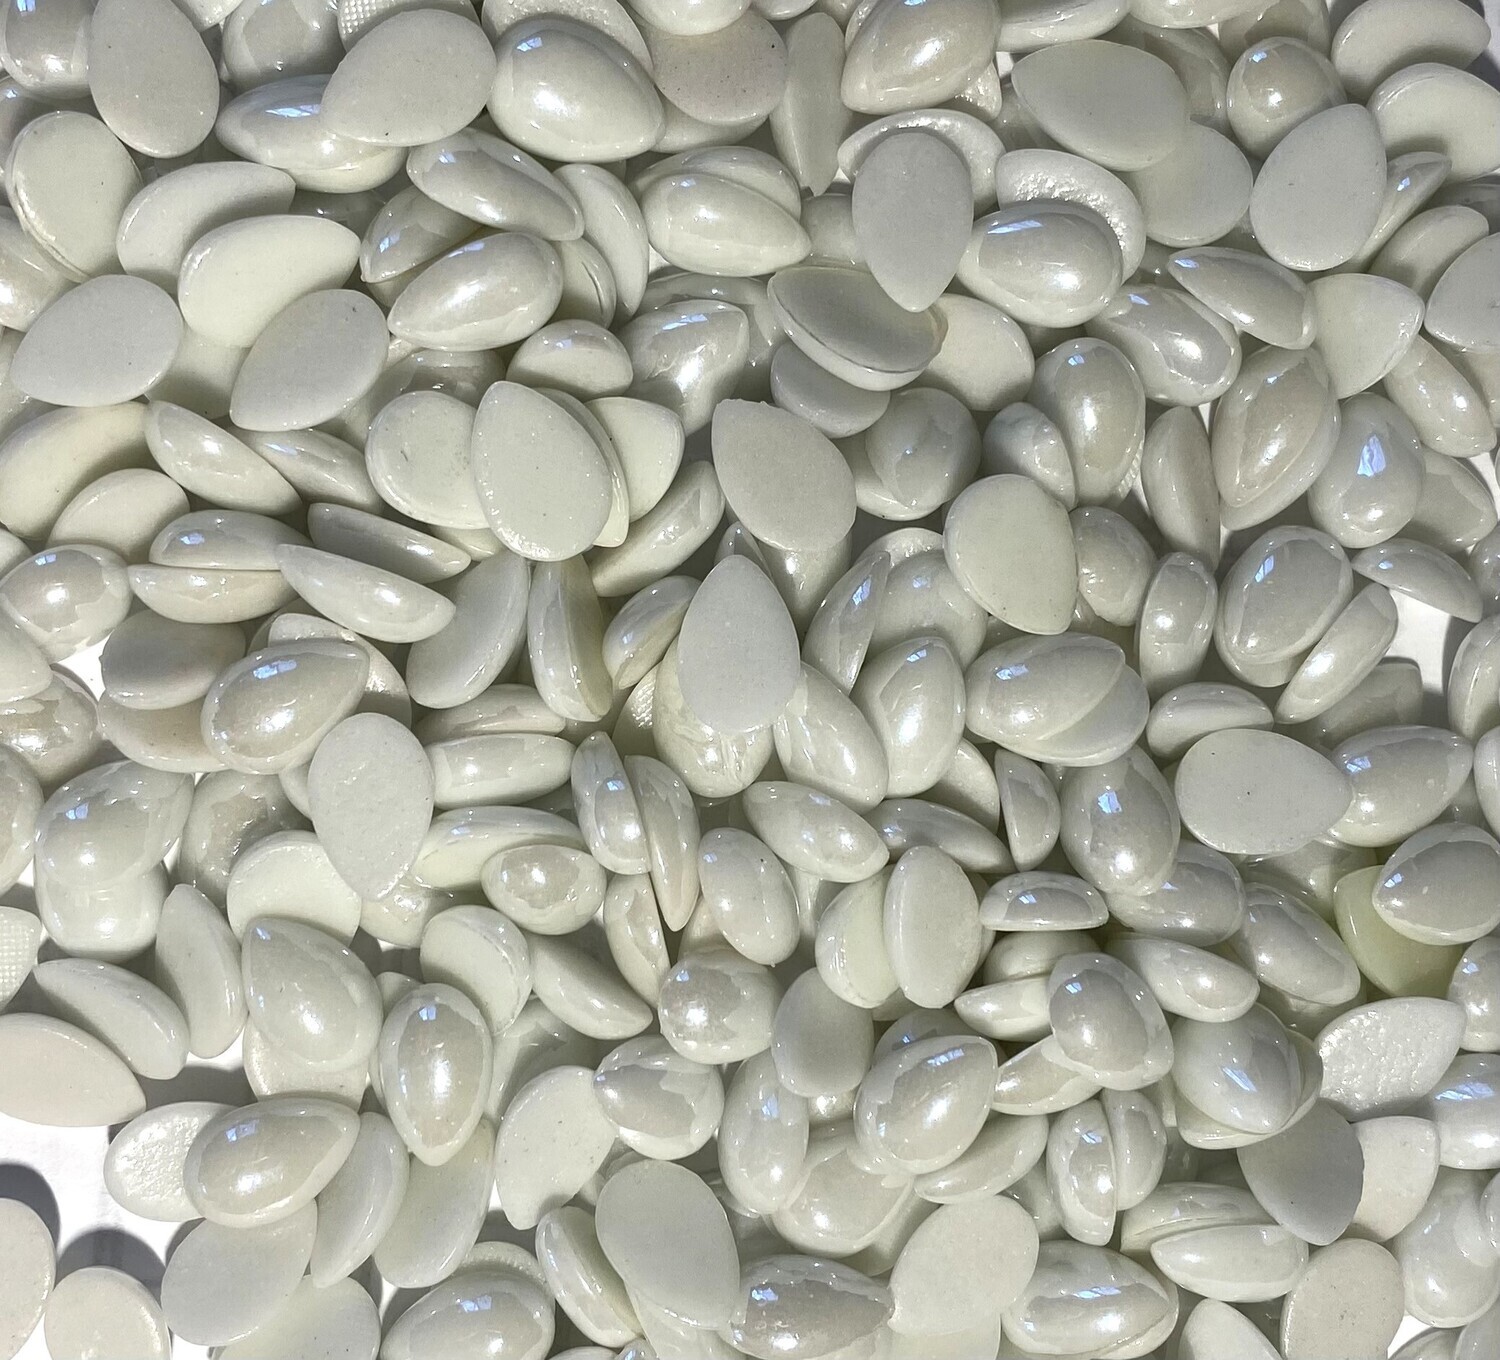 50 Pearlescent White Glass Teardrop Tiles